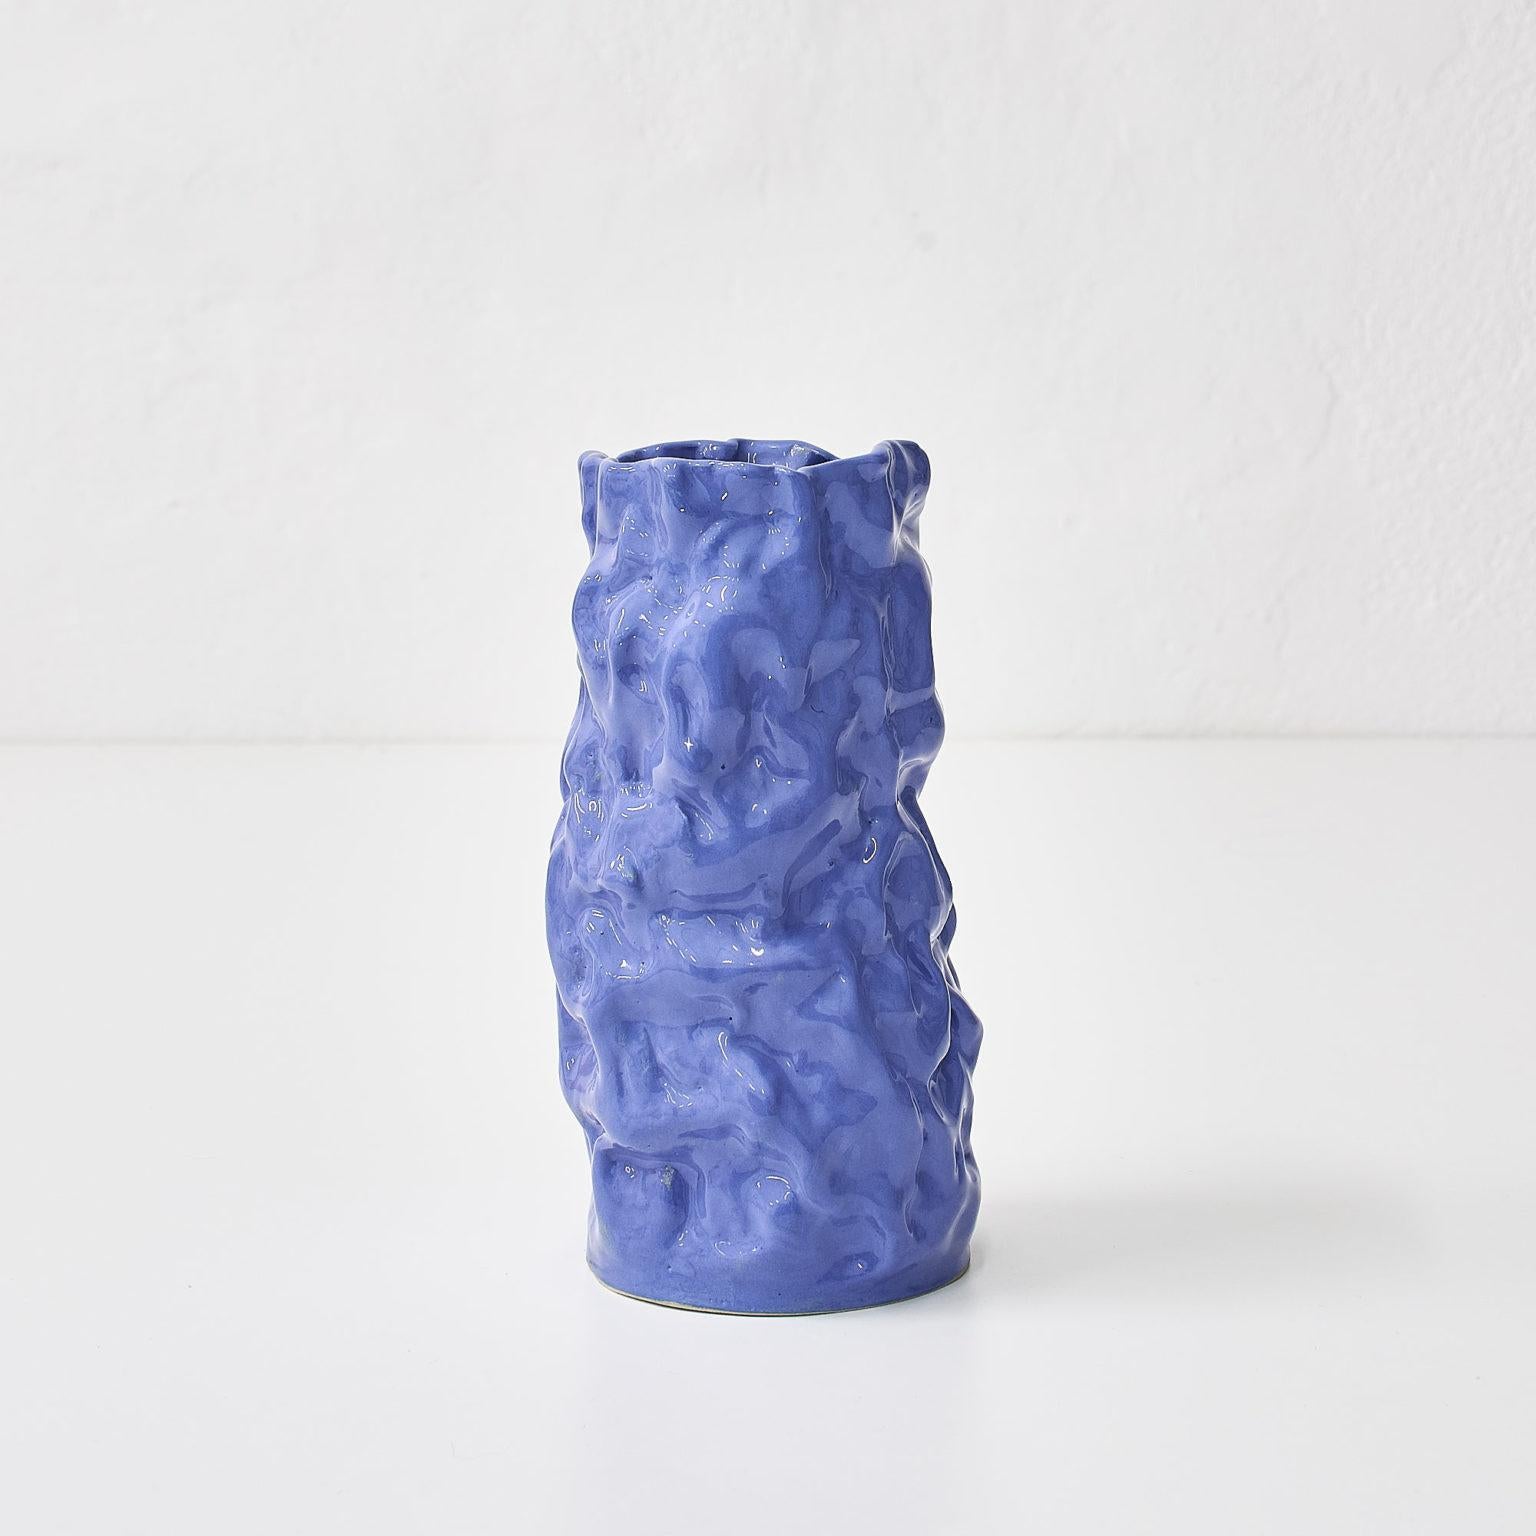 Wrinkled Blue Vase by Siup Studio
Dimensions: D8 x H16cm
Materials: Ceramics

Siup is a small design studio based in Warsaw. The concept is created by three friends – Martyna Dymek, Marcin Sieczka and Kasia Skoczylas – who have met in University